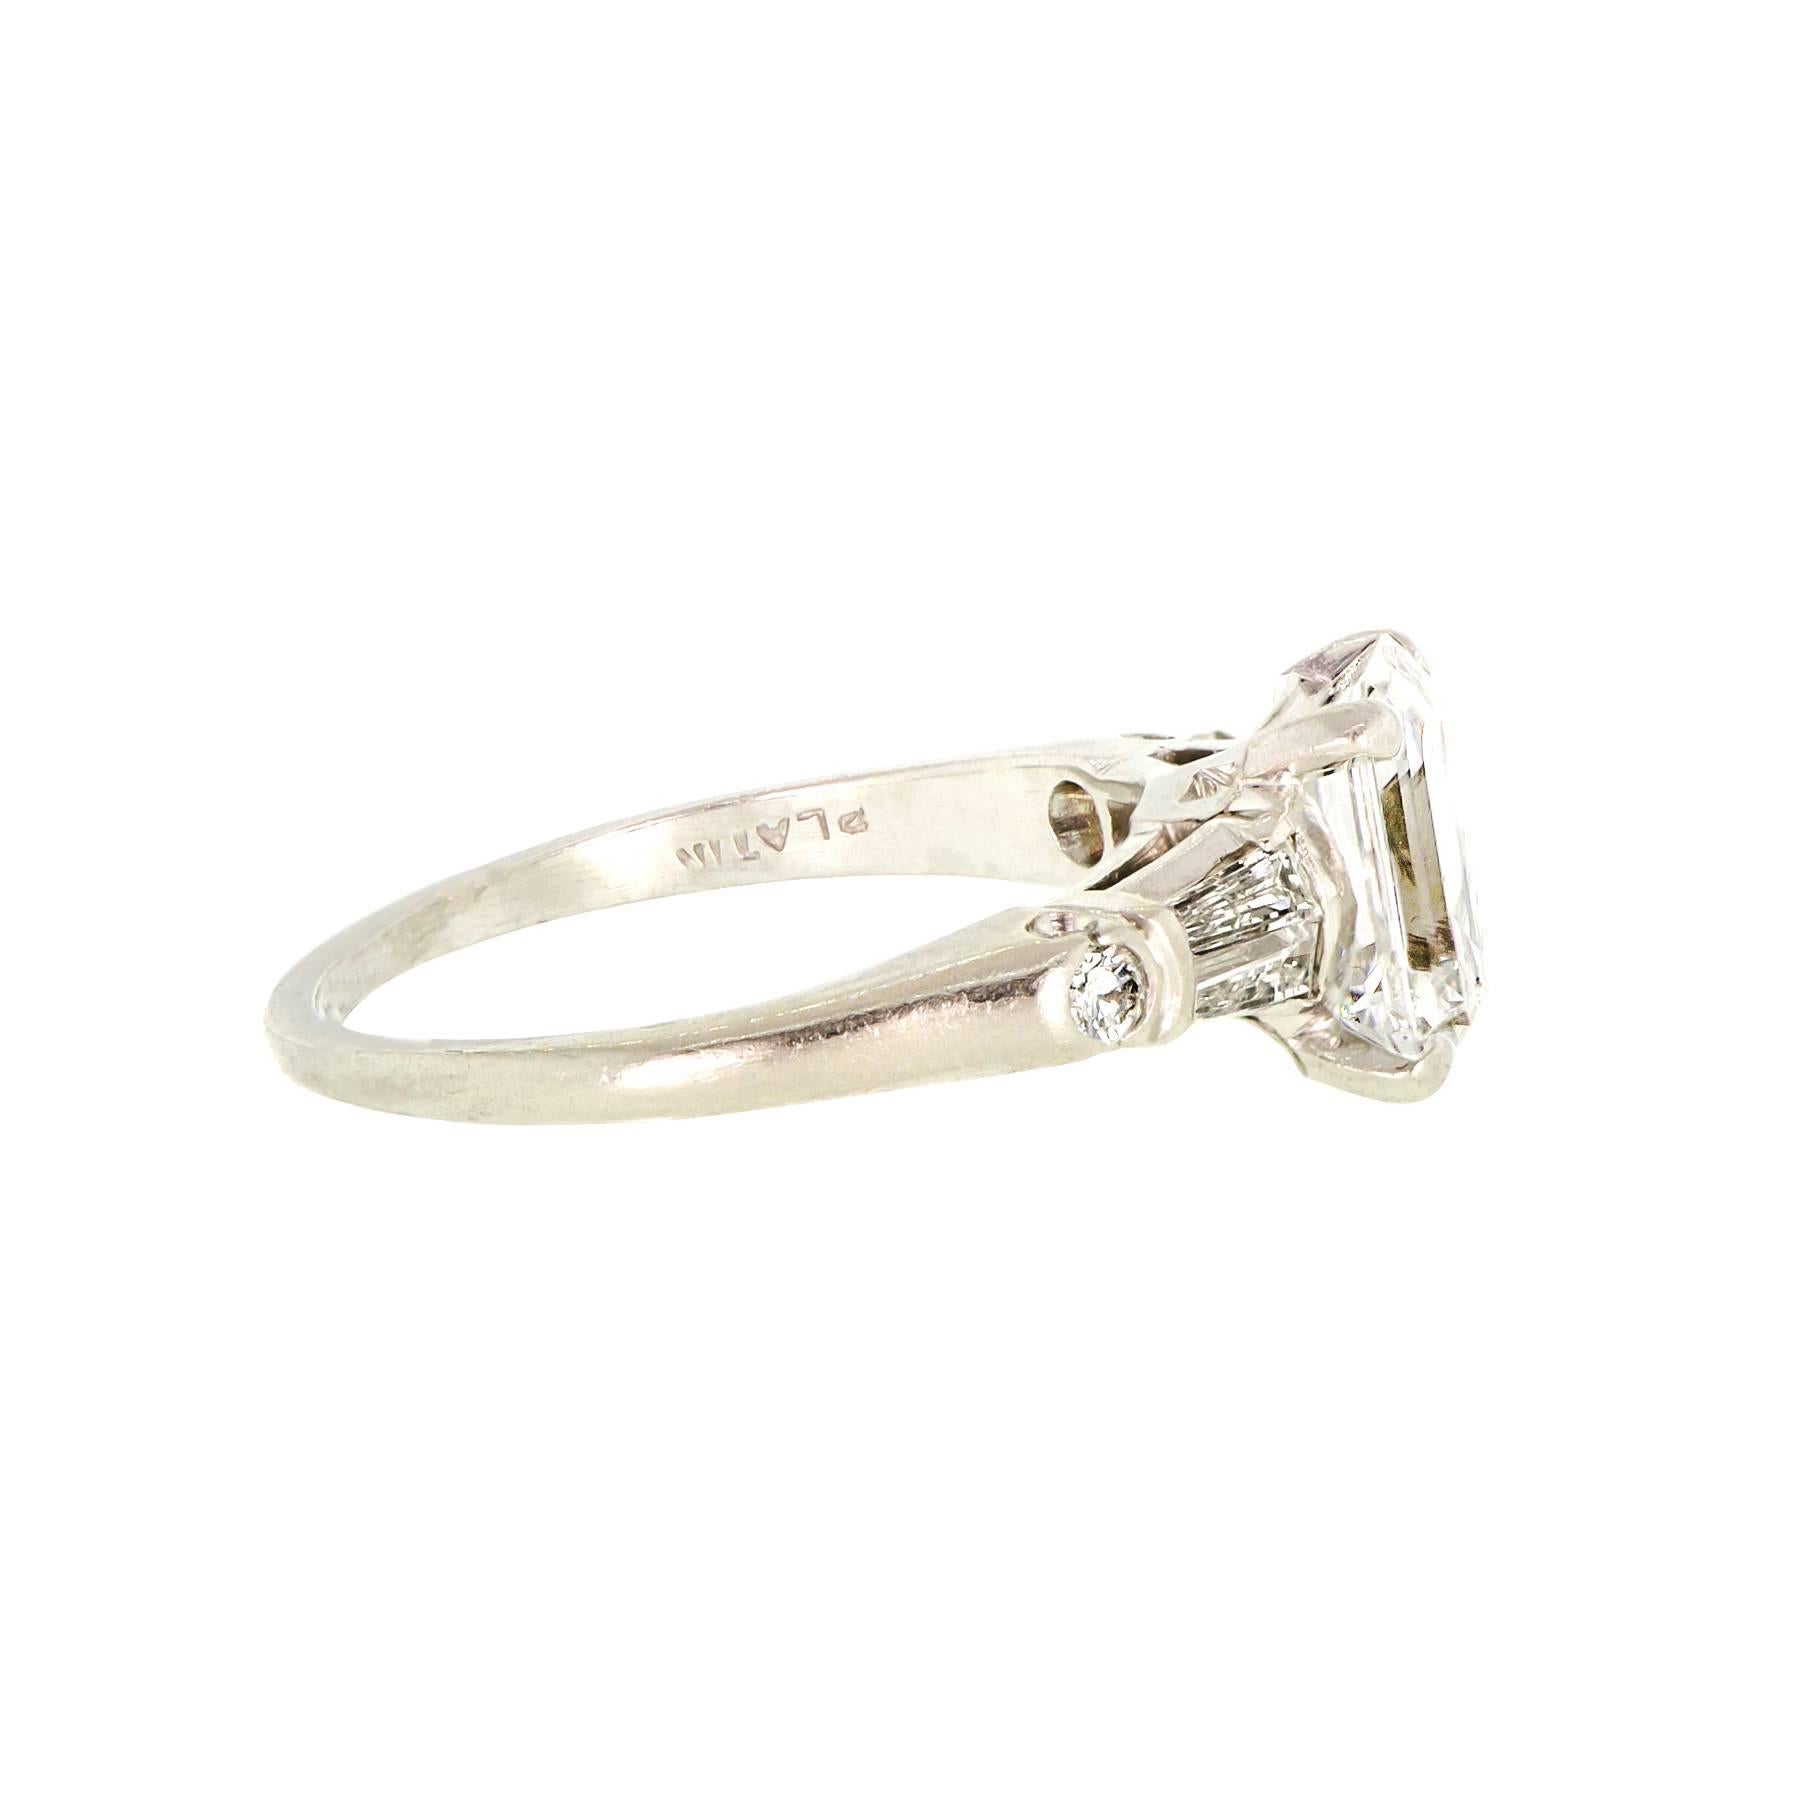 Vintage 1.84 ct. emerald cut diamond ring VVS2 - F plus .23 cts. two tapered baguettes. channel set .17 cts approx. total weight along with two round .06 cts. total weight   diamonds all set in a platinum mount.  

Appraisal provided.

8.20 x 5.95 x